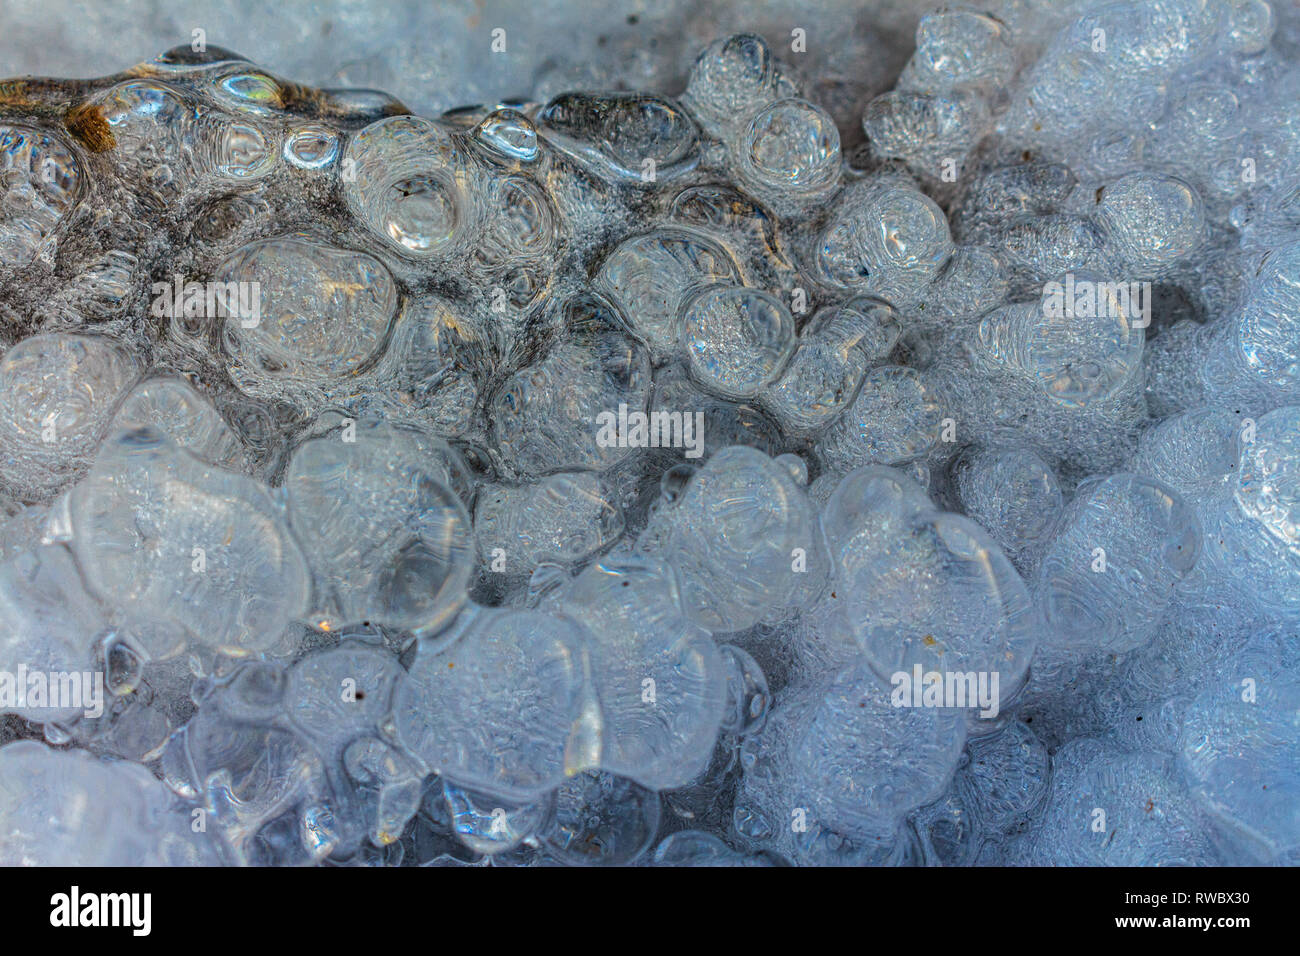 Ice bubbles with many air bubbles inside. Frozen water drops close-up. Figured ice macro photography. Stock Photo